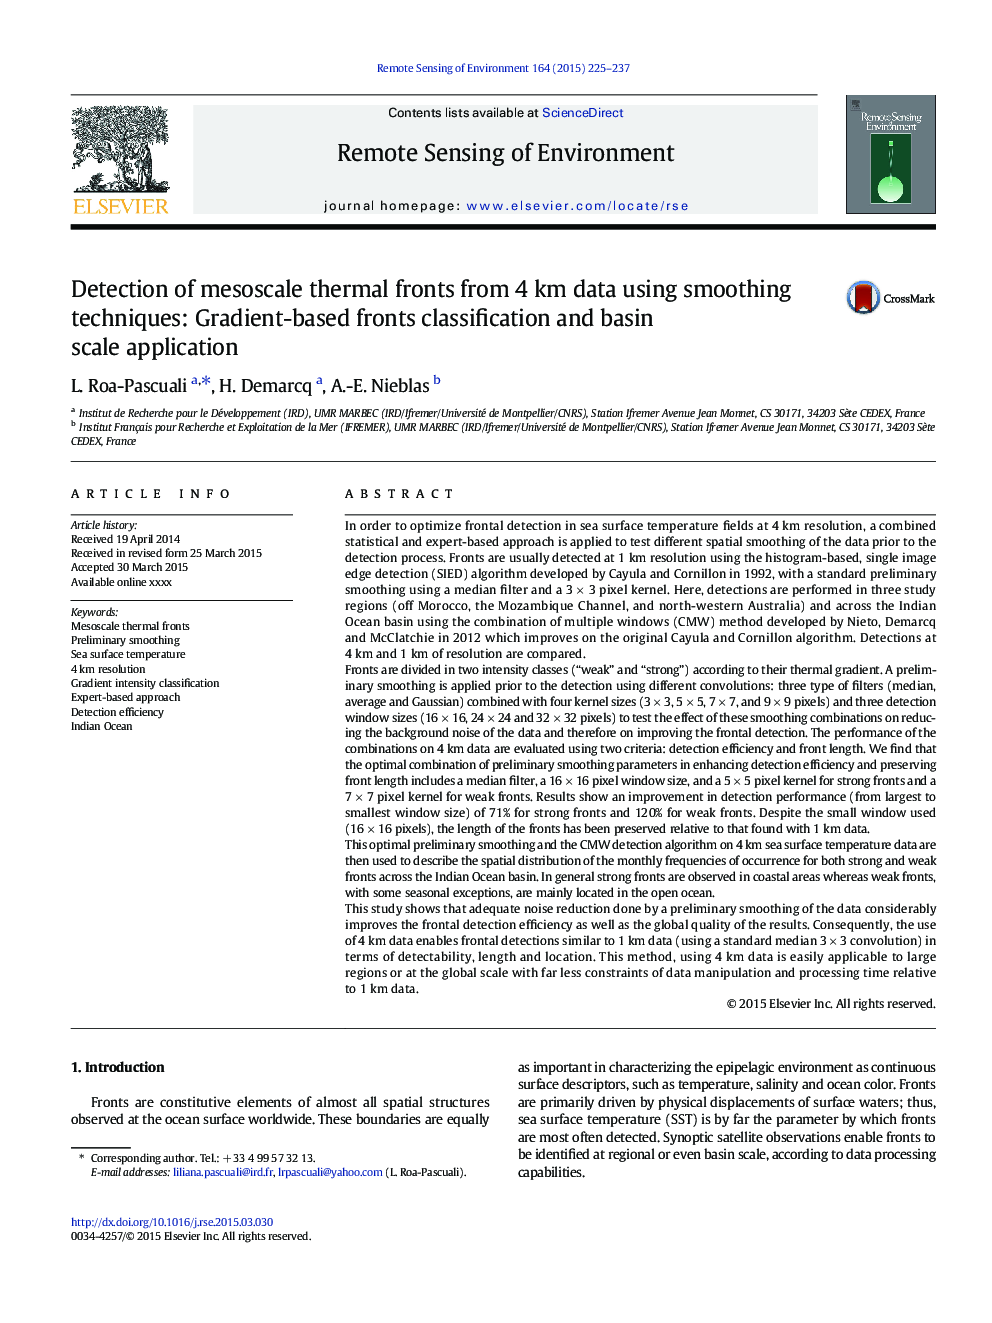 Detection of mesoscale thermal fronts from 4Â km data using smoothing techniques: Gradient-based fronts classification and basin scale application